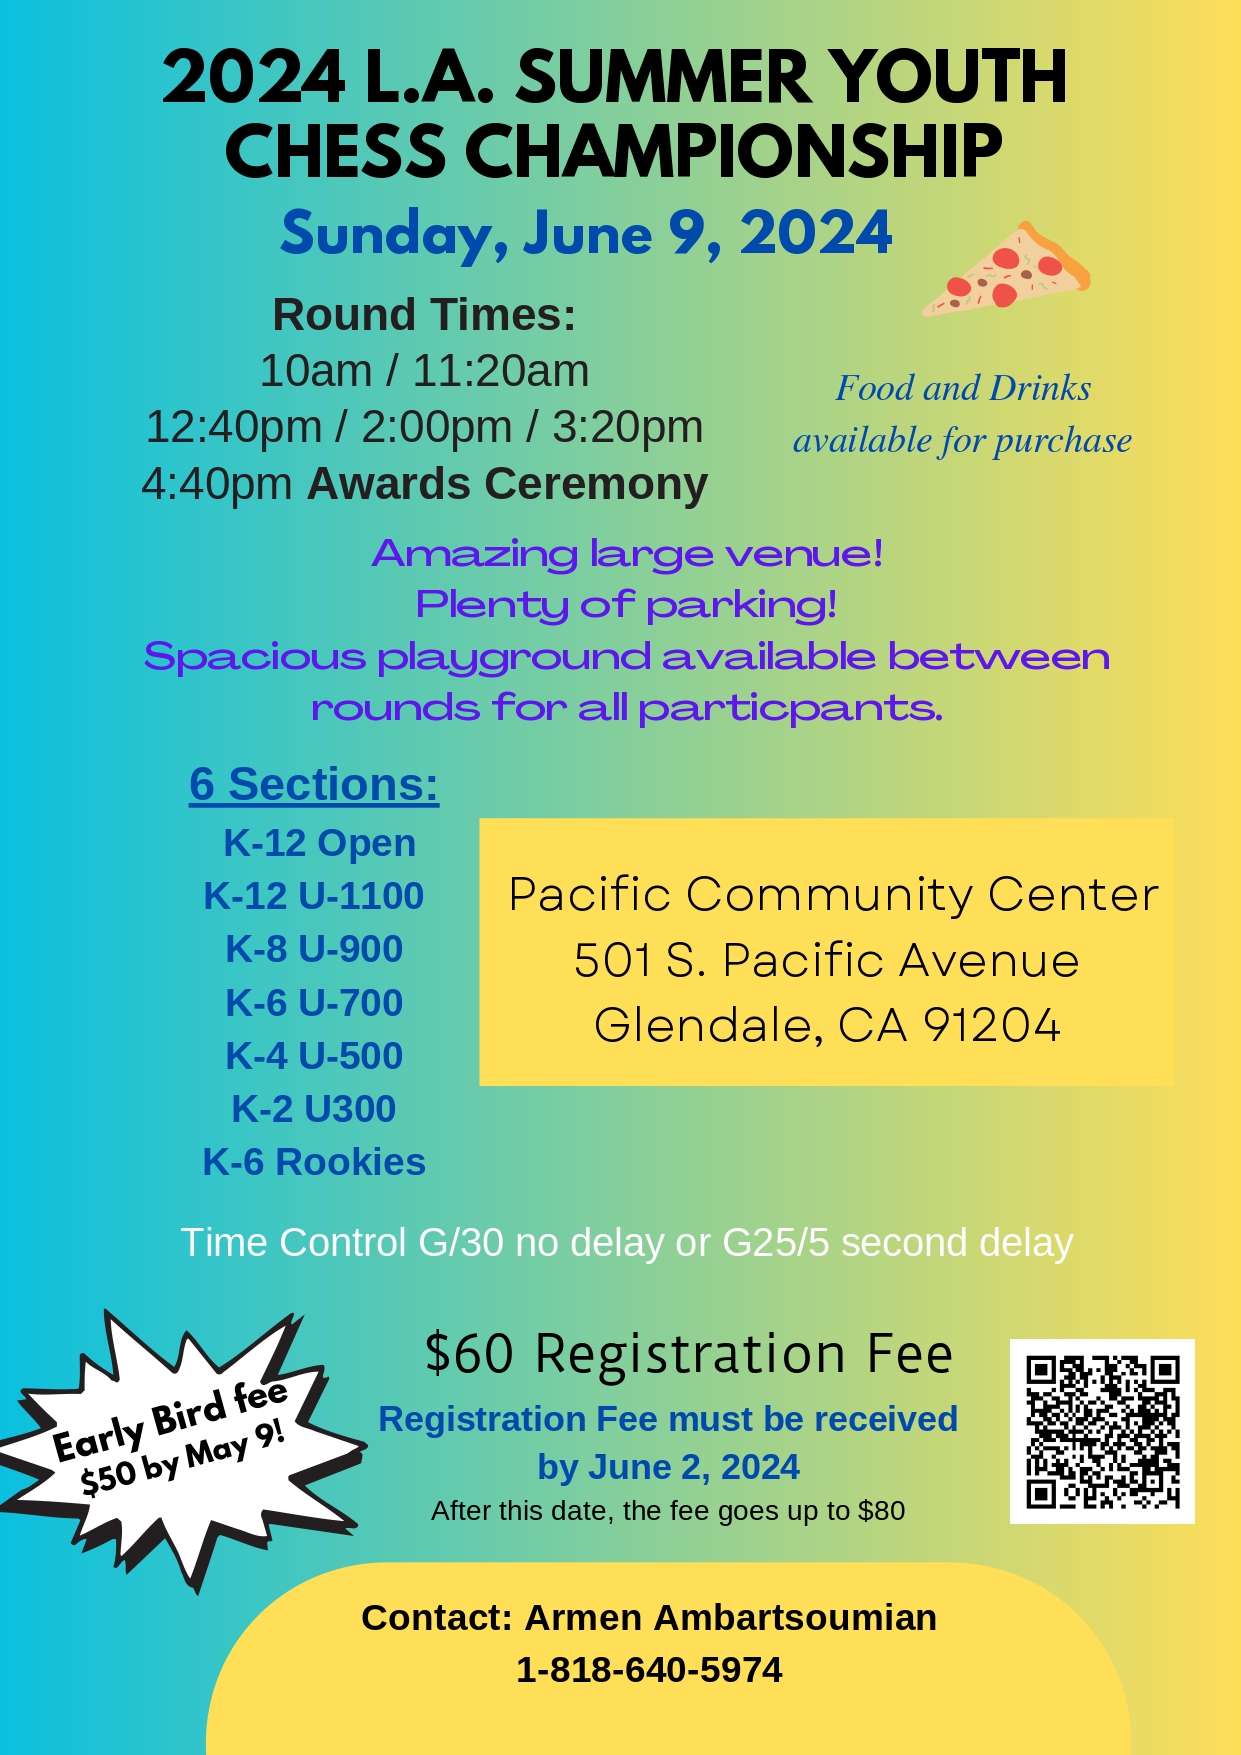 2024 L.A. Summer Youth Chess Championship